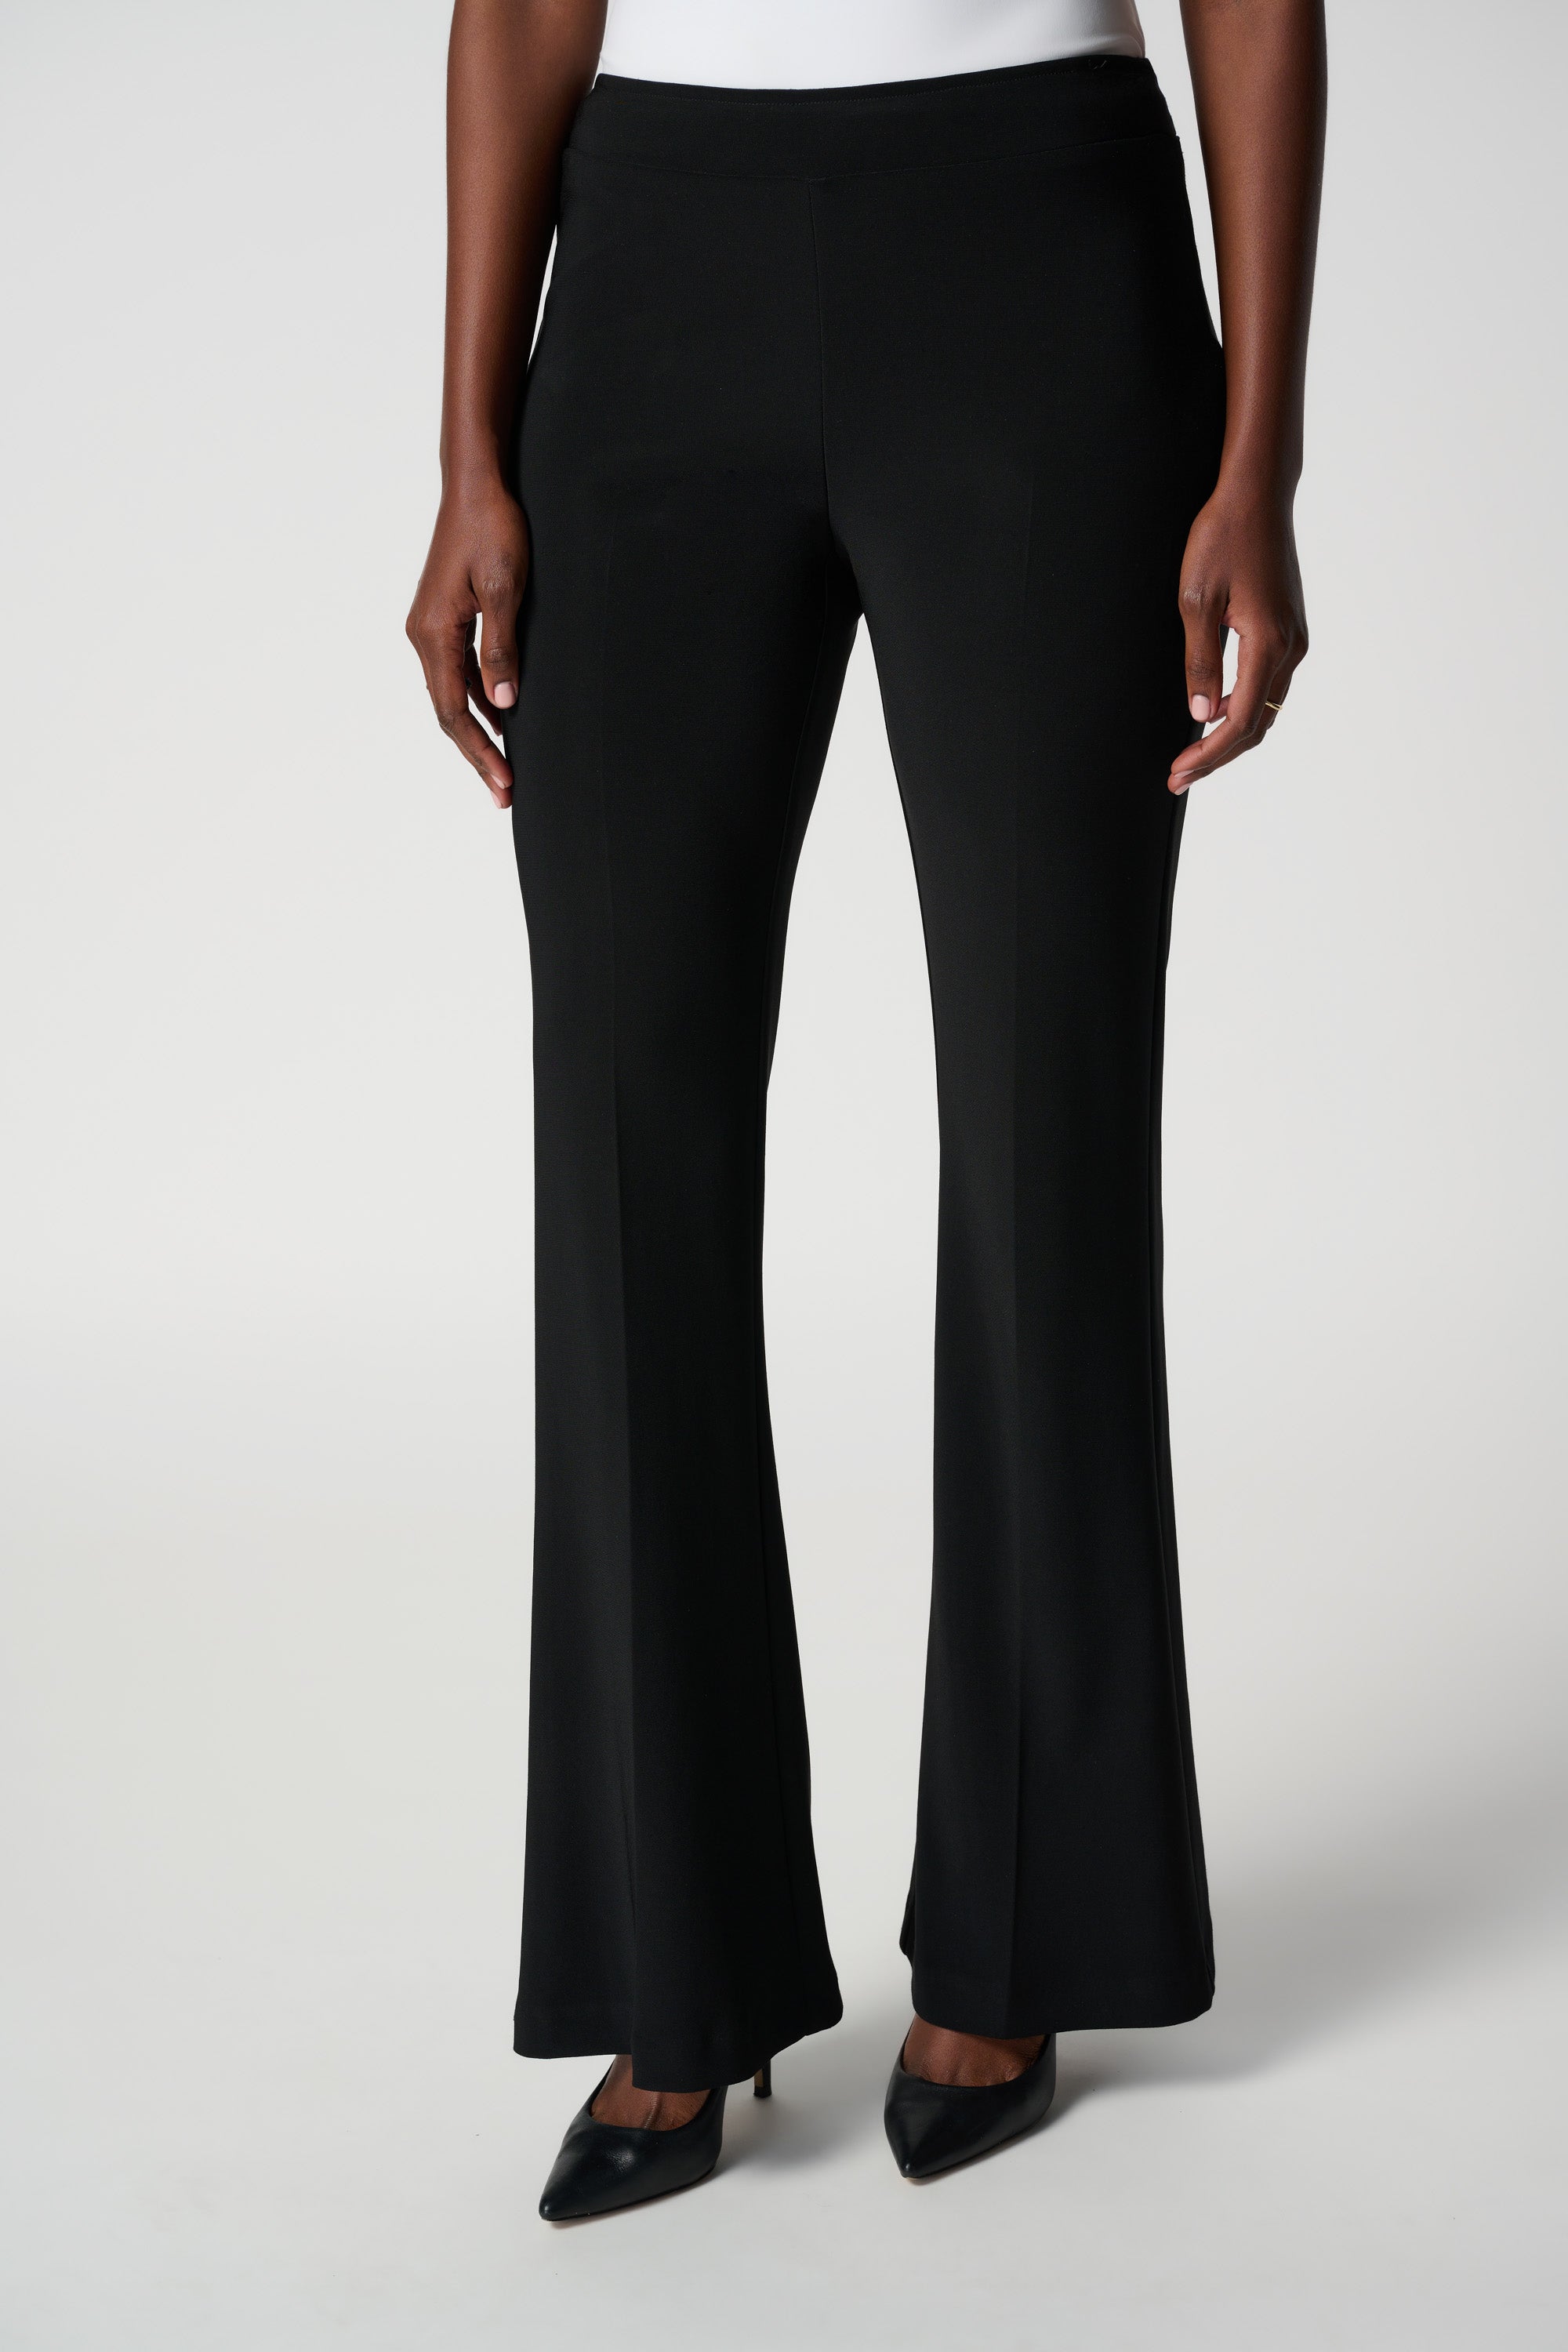 Joseph Ribkoff (163099NOS) Women's Classic Pull-On Flared Pants - The Essentials in Black